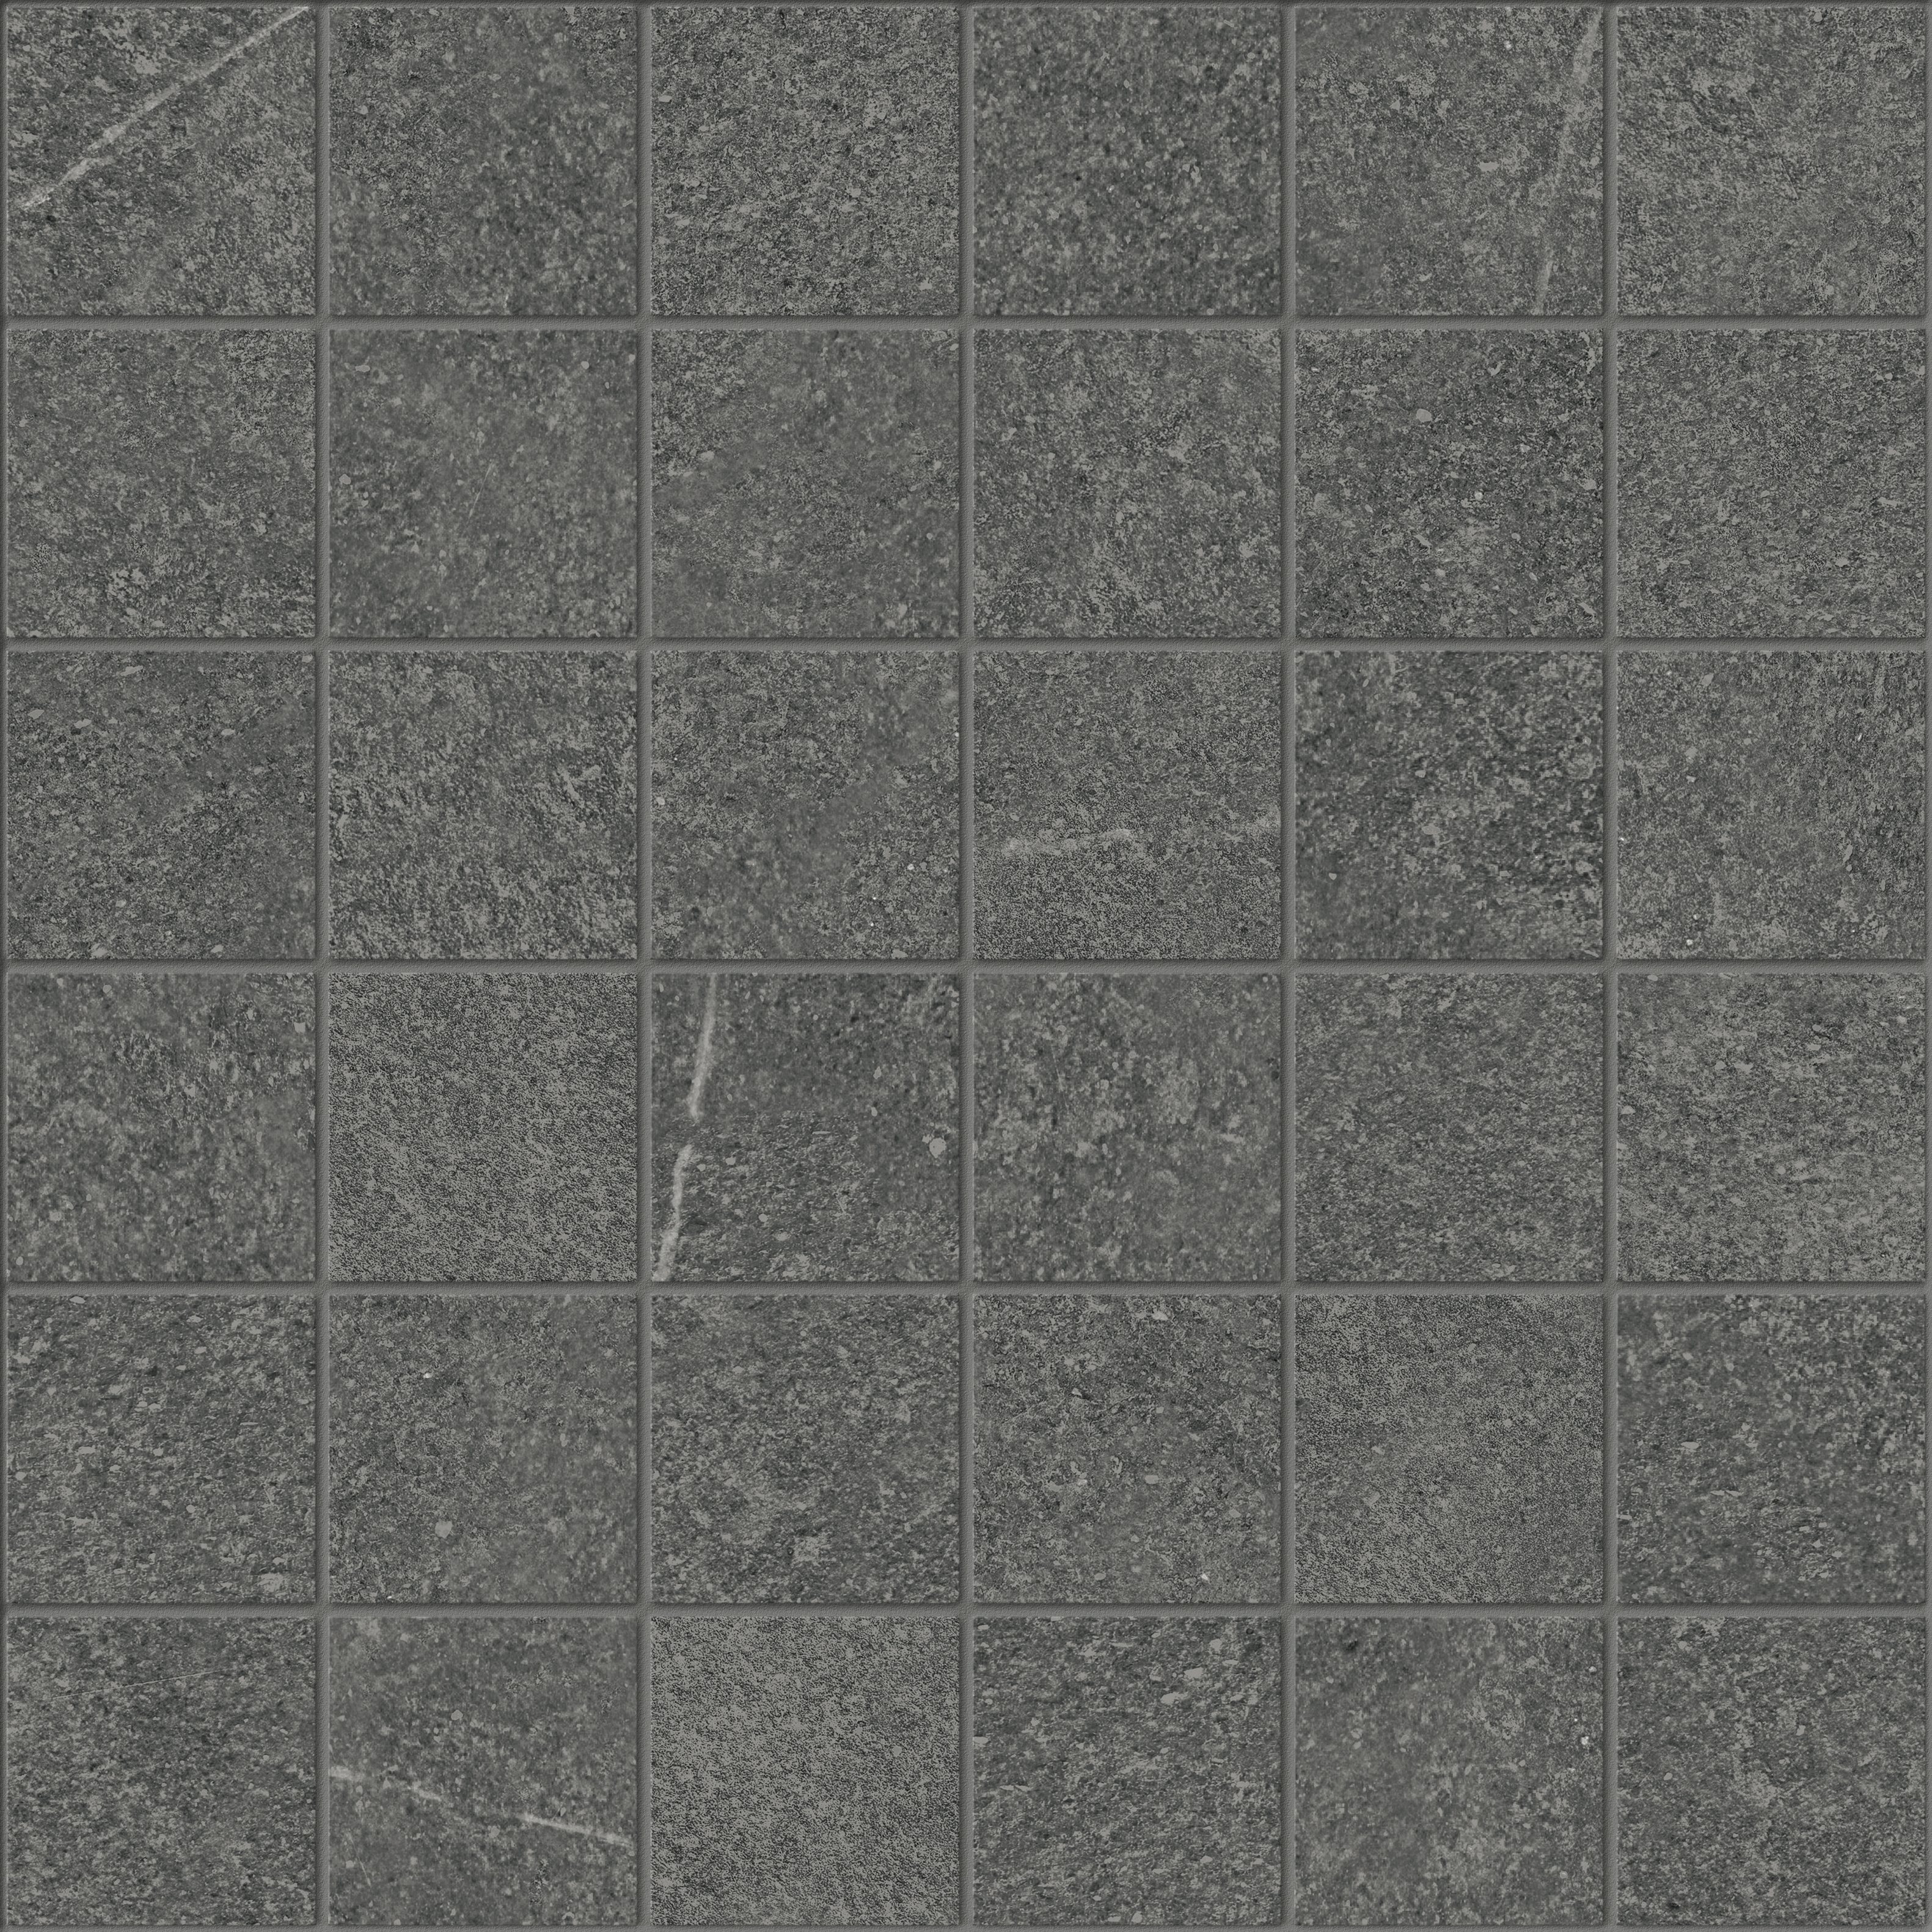 carbon straight stack 2x2-inch pattern color body porcelain mosaic from mjork anatolia collection distributed by surface group international matte finish straight edge edge mesh shape